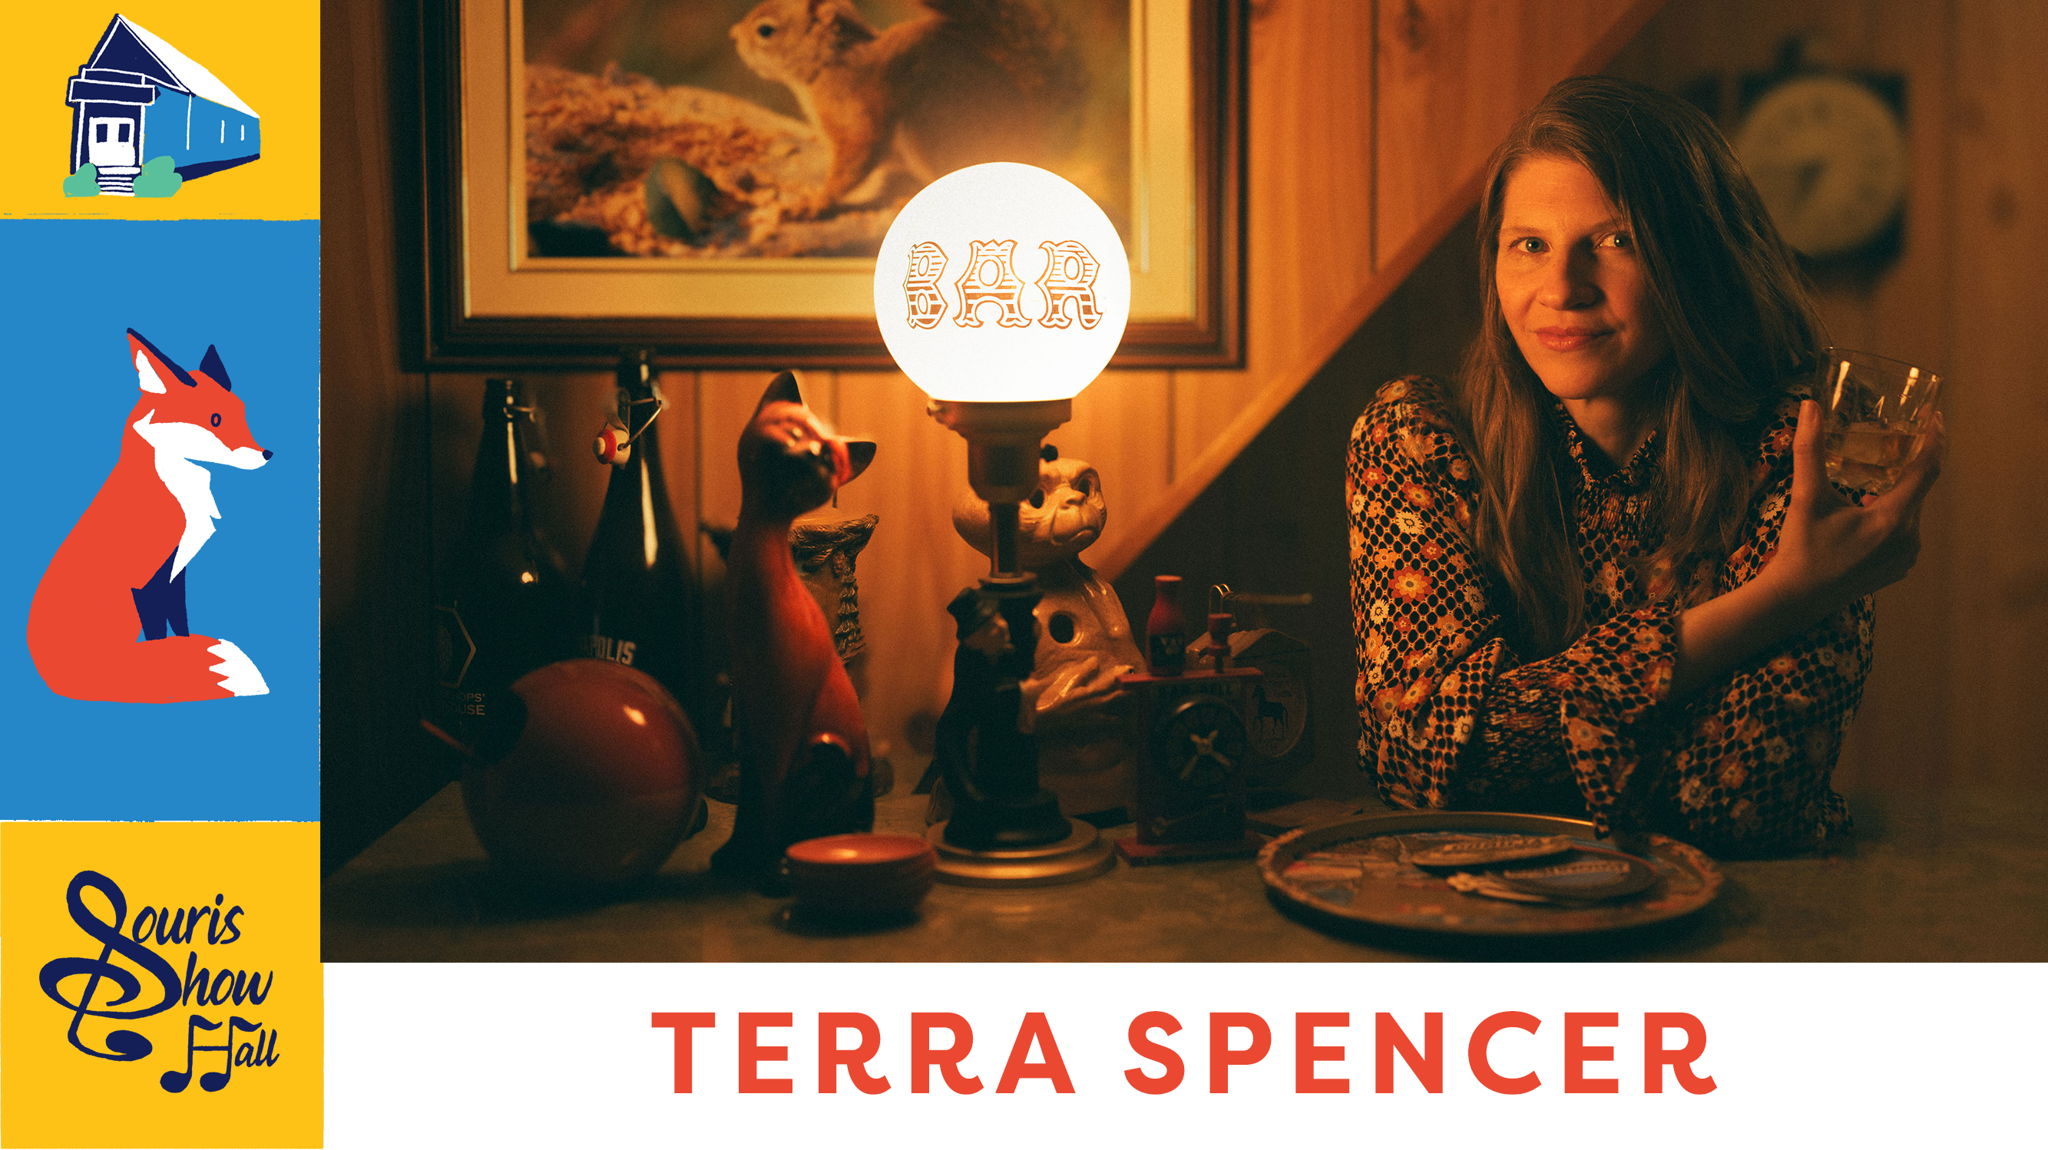 Terra Spencer at the Souris Show Hall